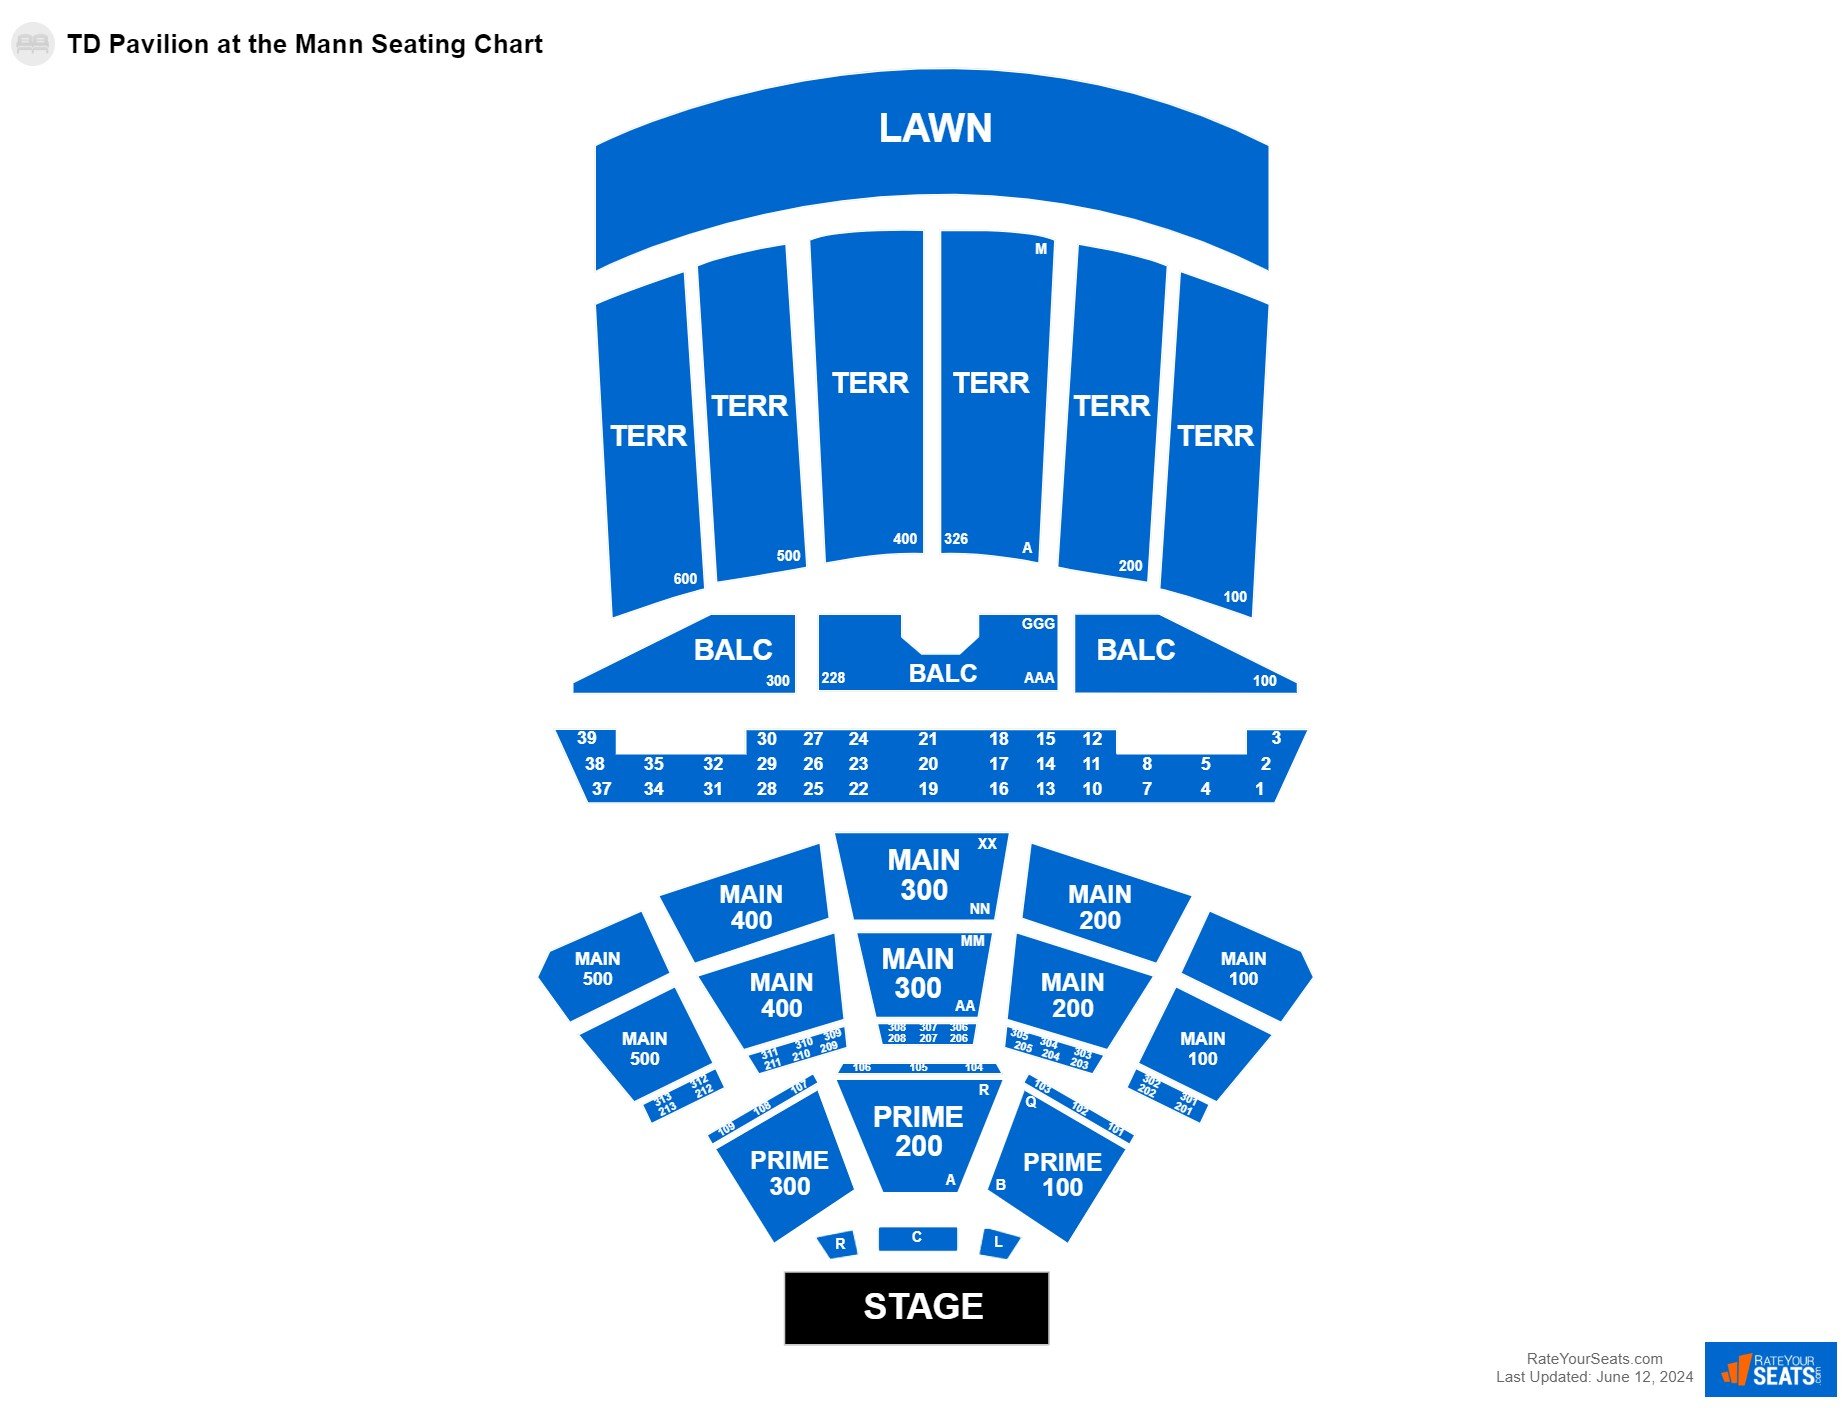 Concert seating chart at TD Pavilion at the Mann